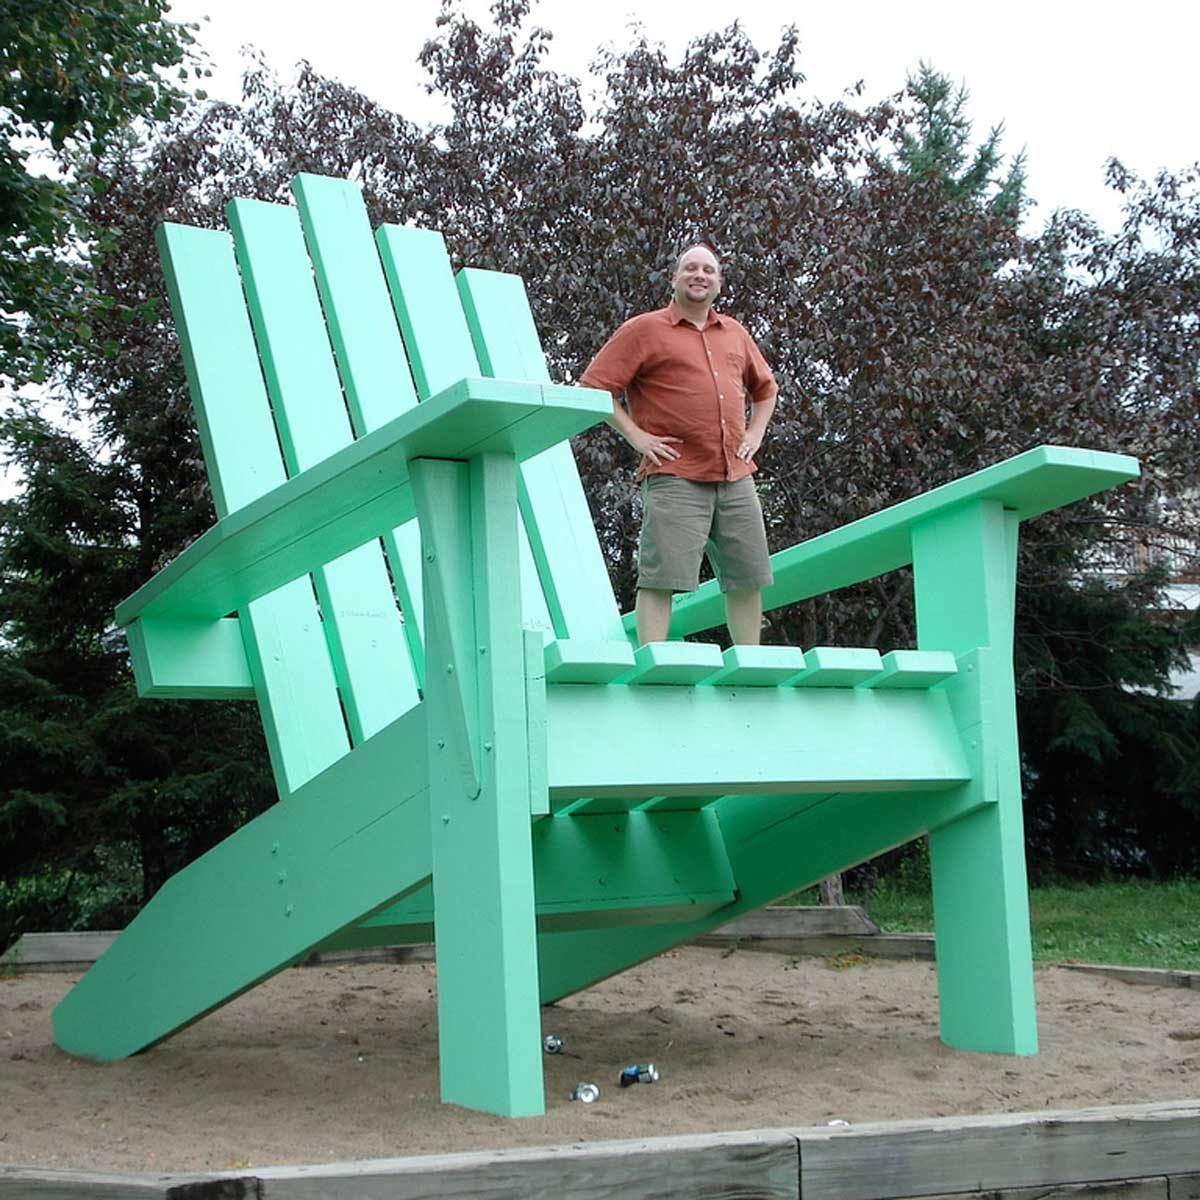 15 Adirondack Chairs You Have to See to Believe